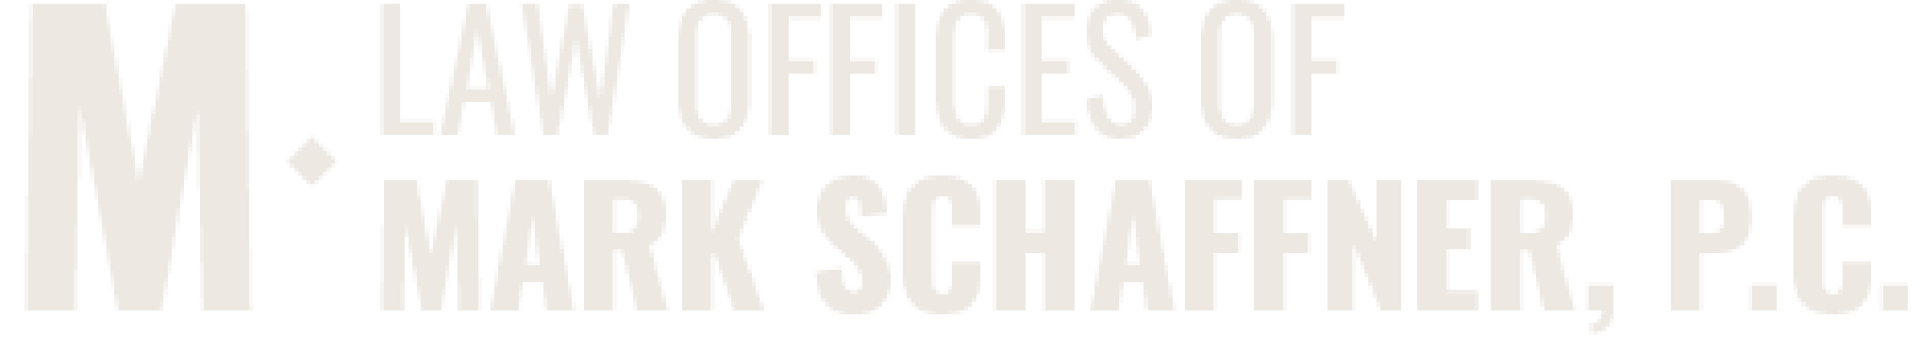 The logo for the law offices of mark schaffner , p.c.